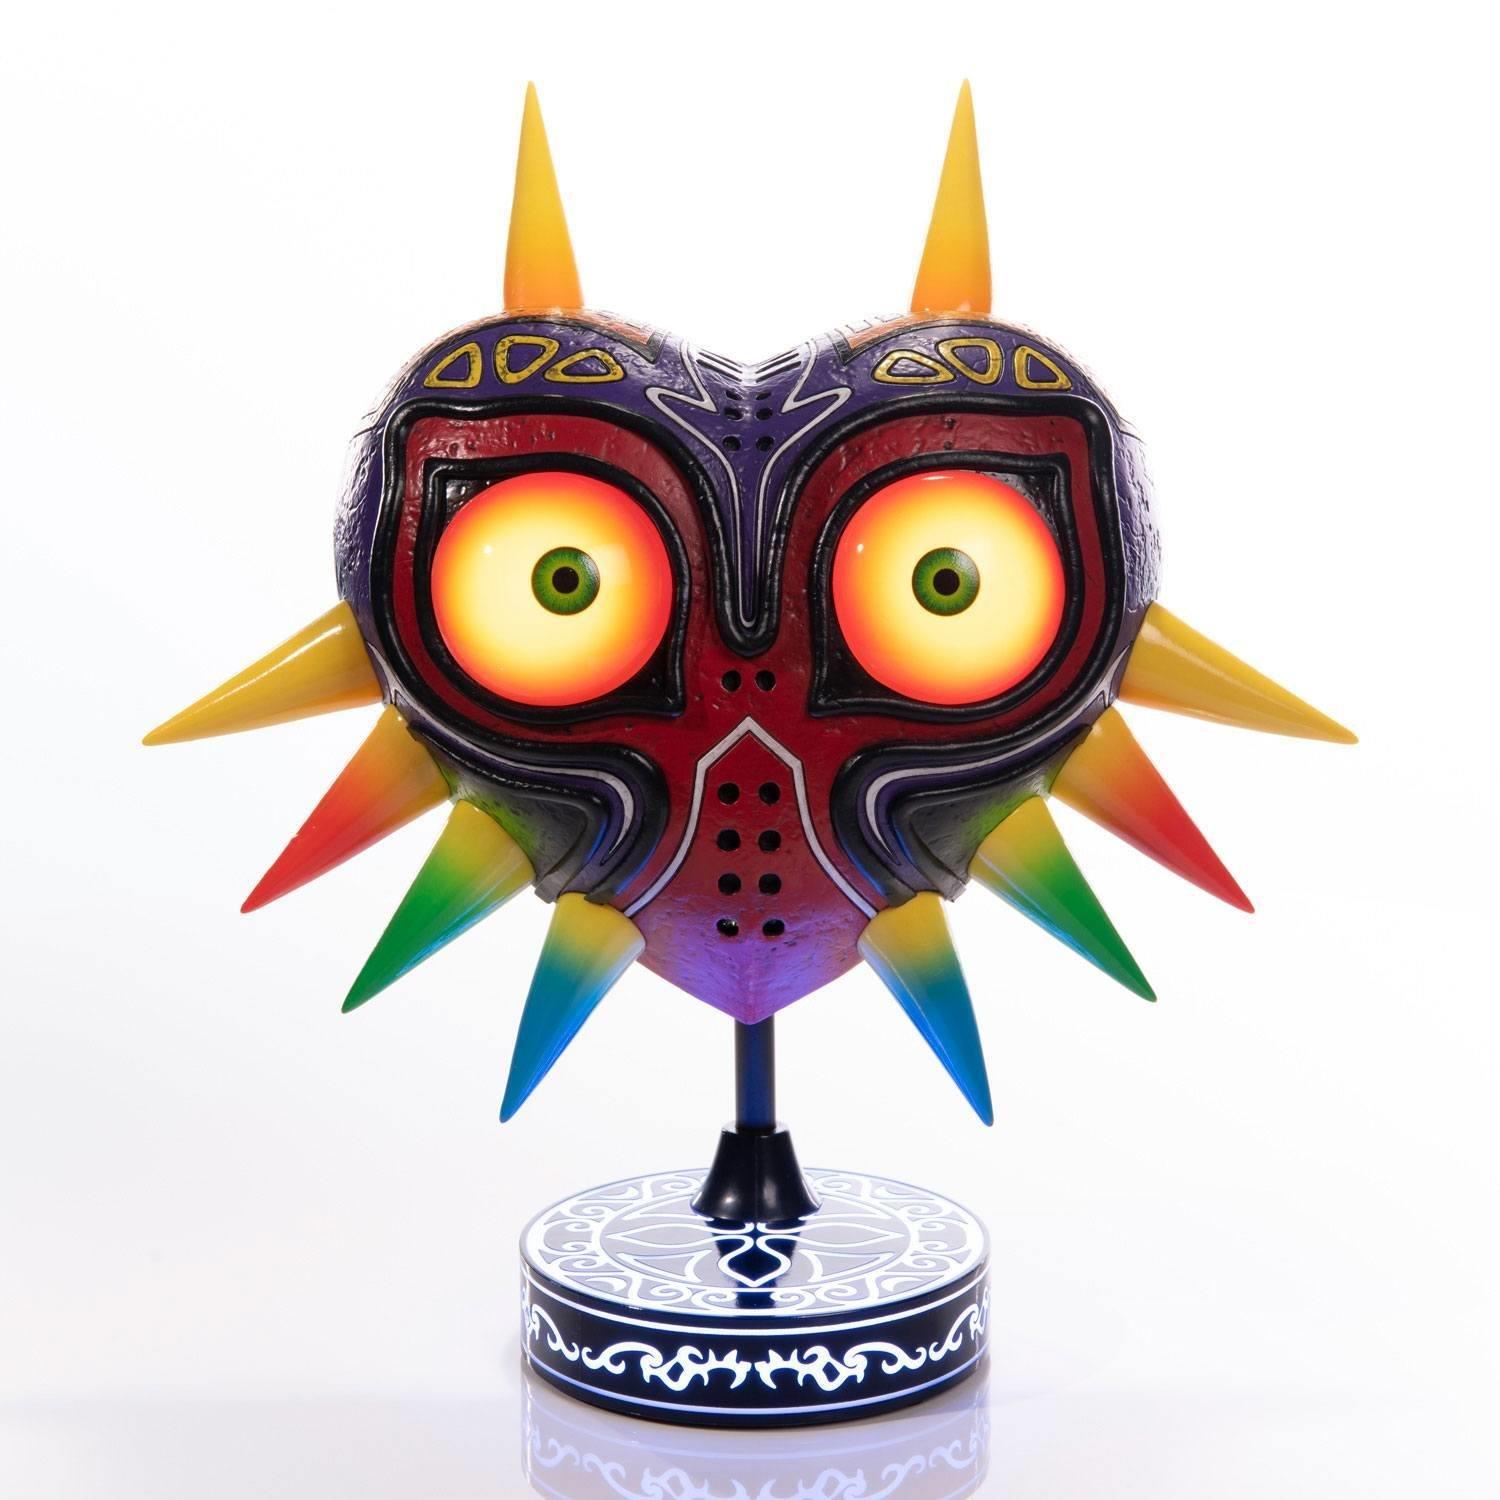 Image of First 4 Figures The Legend of Zelda Majora's Mask Statue - Collector's Edition